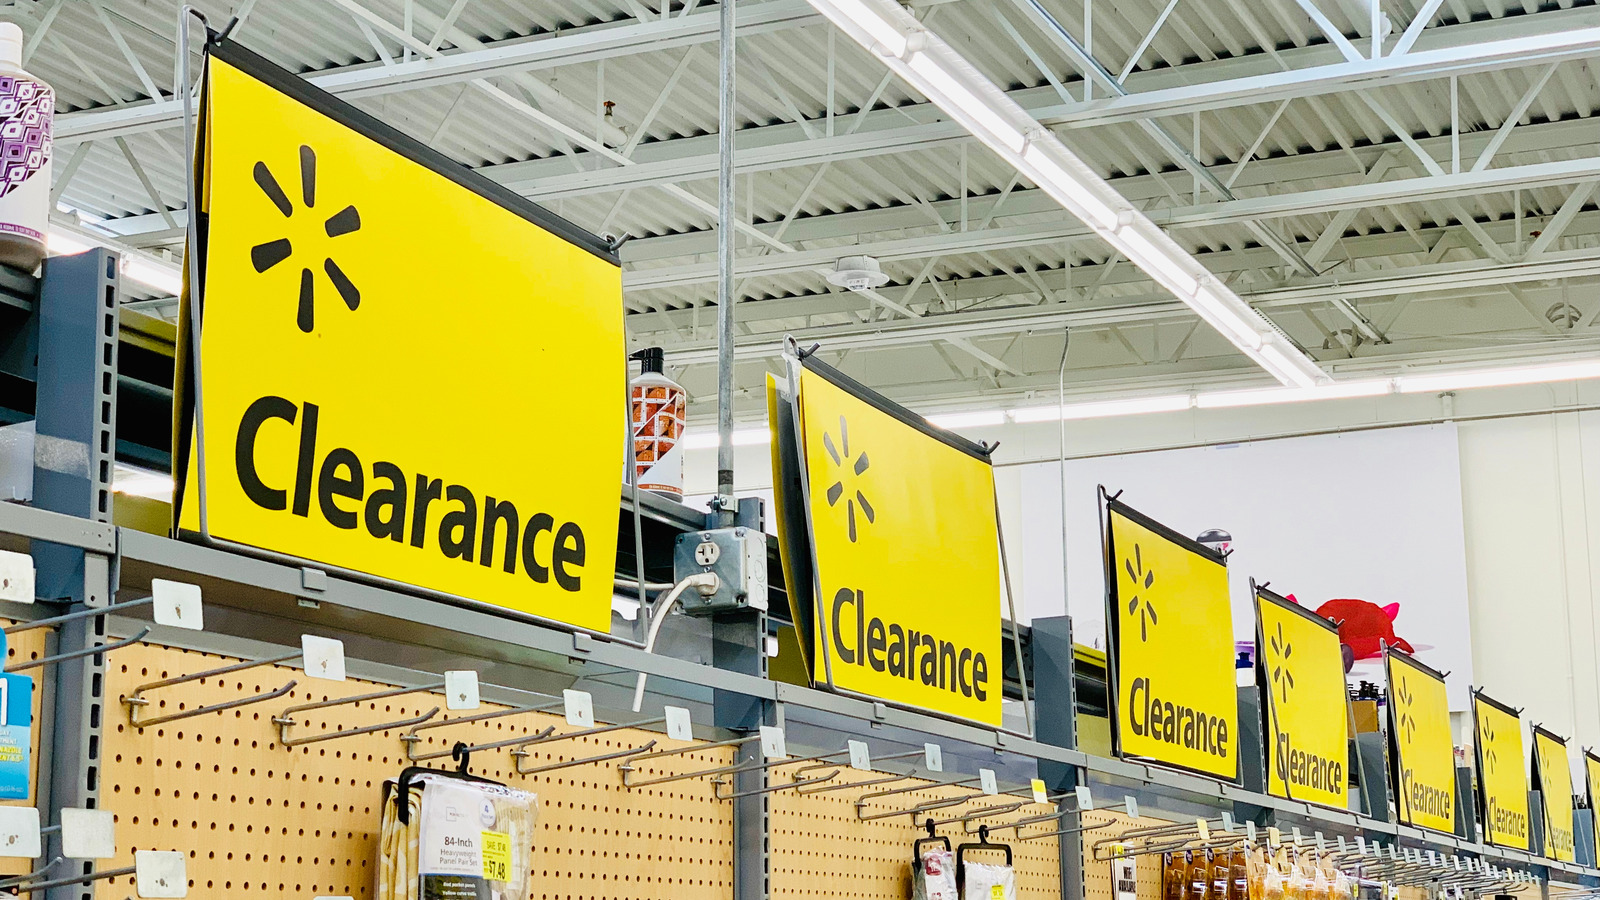 https://www.housedigest.com/img/gallery/how-to-find-walmarts-best-hidden-clearance-deals-on-home-goods/l-intro-1673759150.jpg